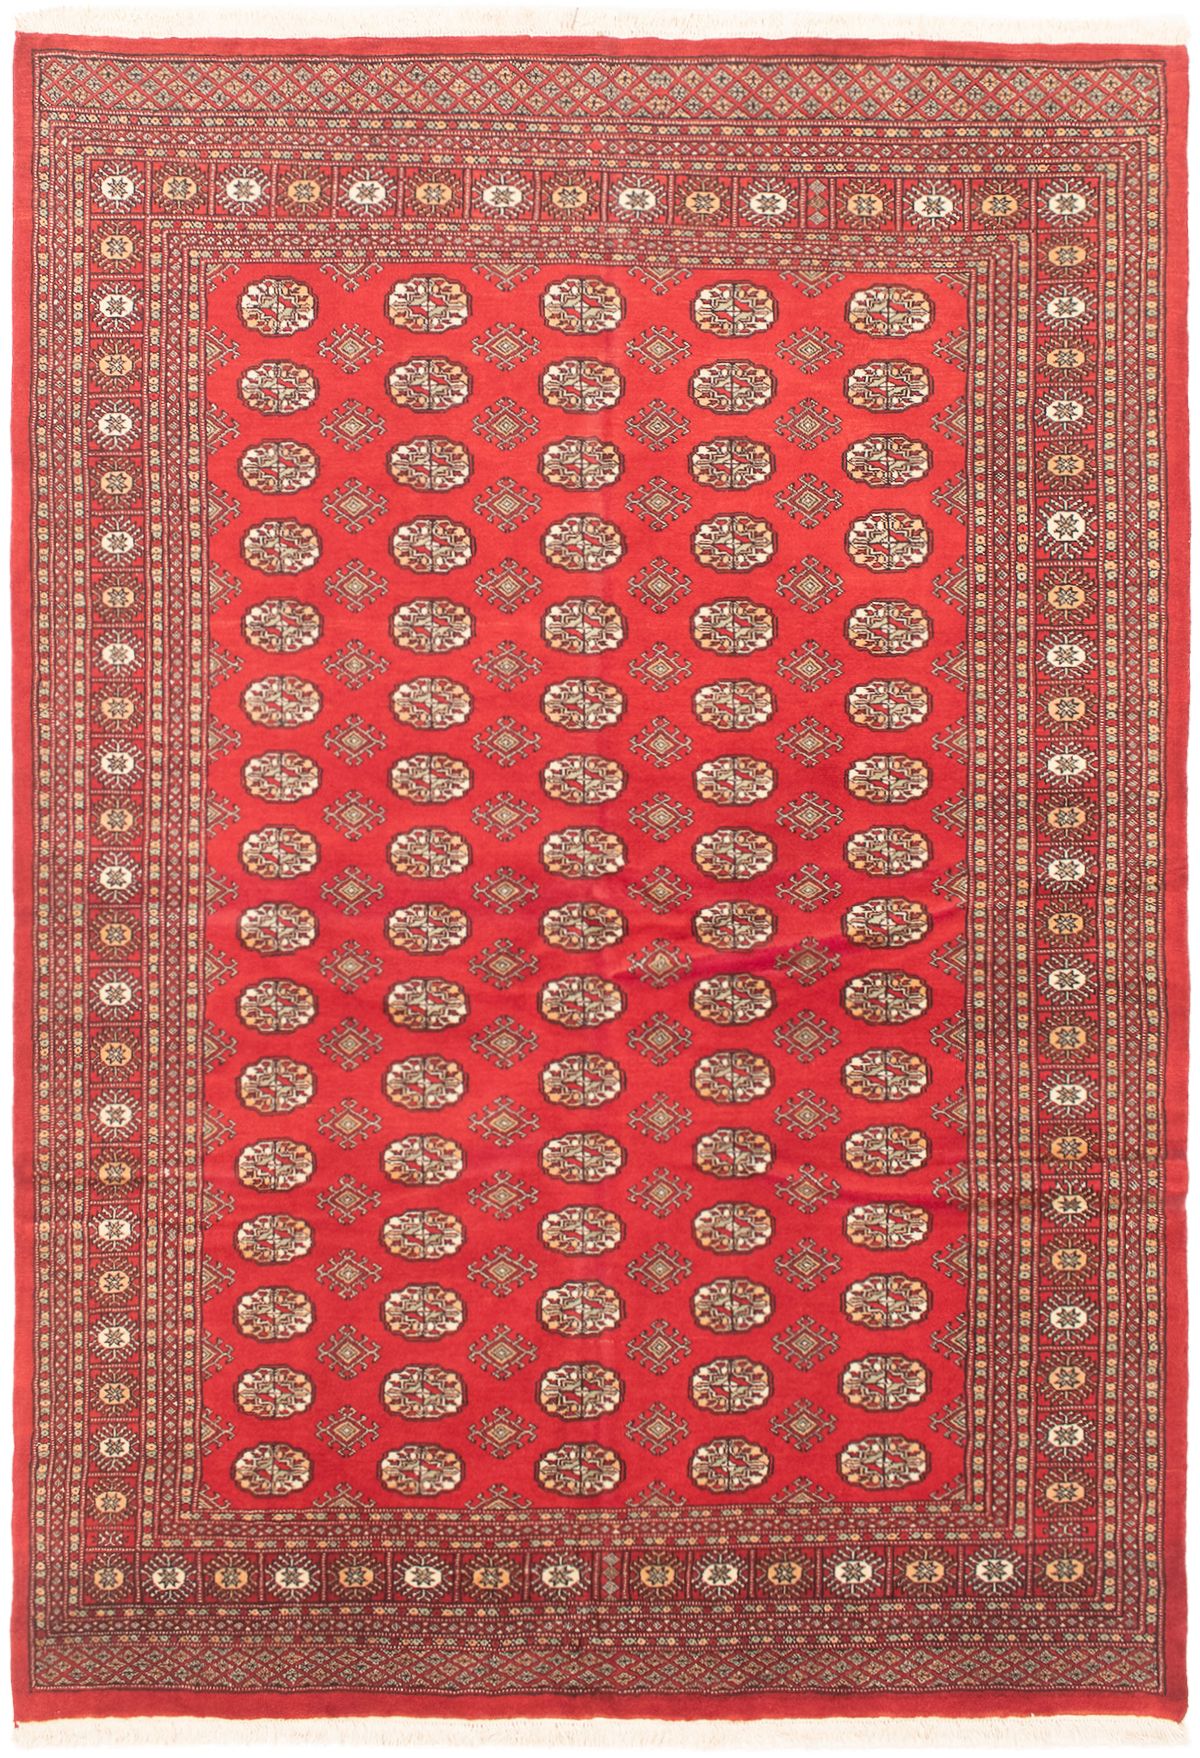 Hand-knotted Finest Peshawar Bokhara Red Wool Rug 6'0" x 9'0"  Size: 6'0" x 9'0"  